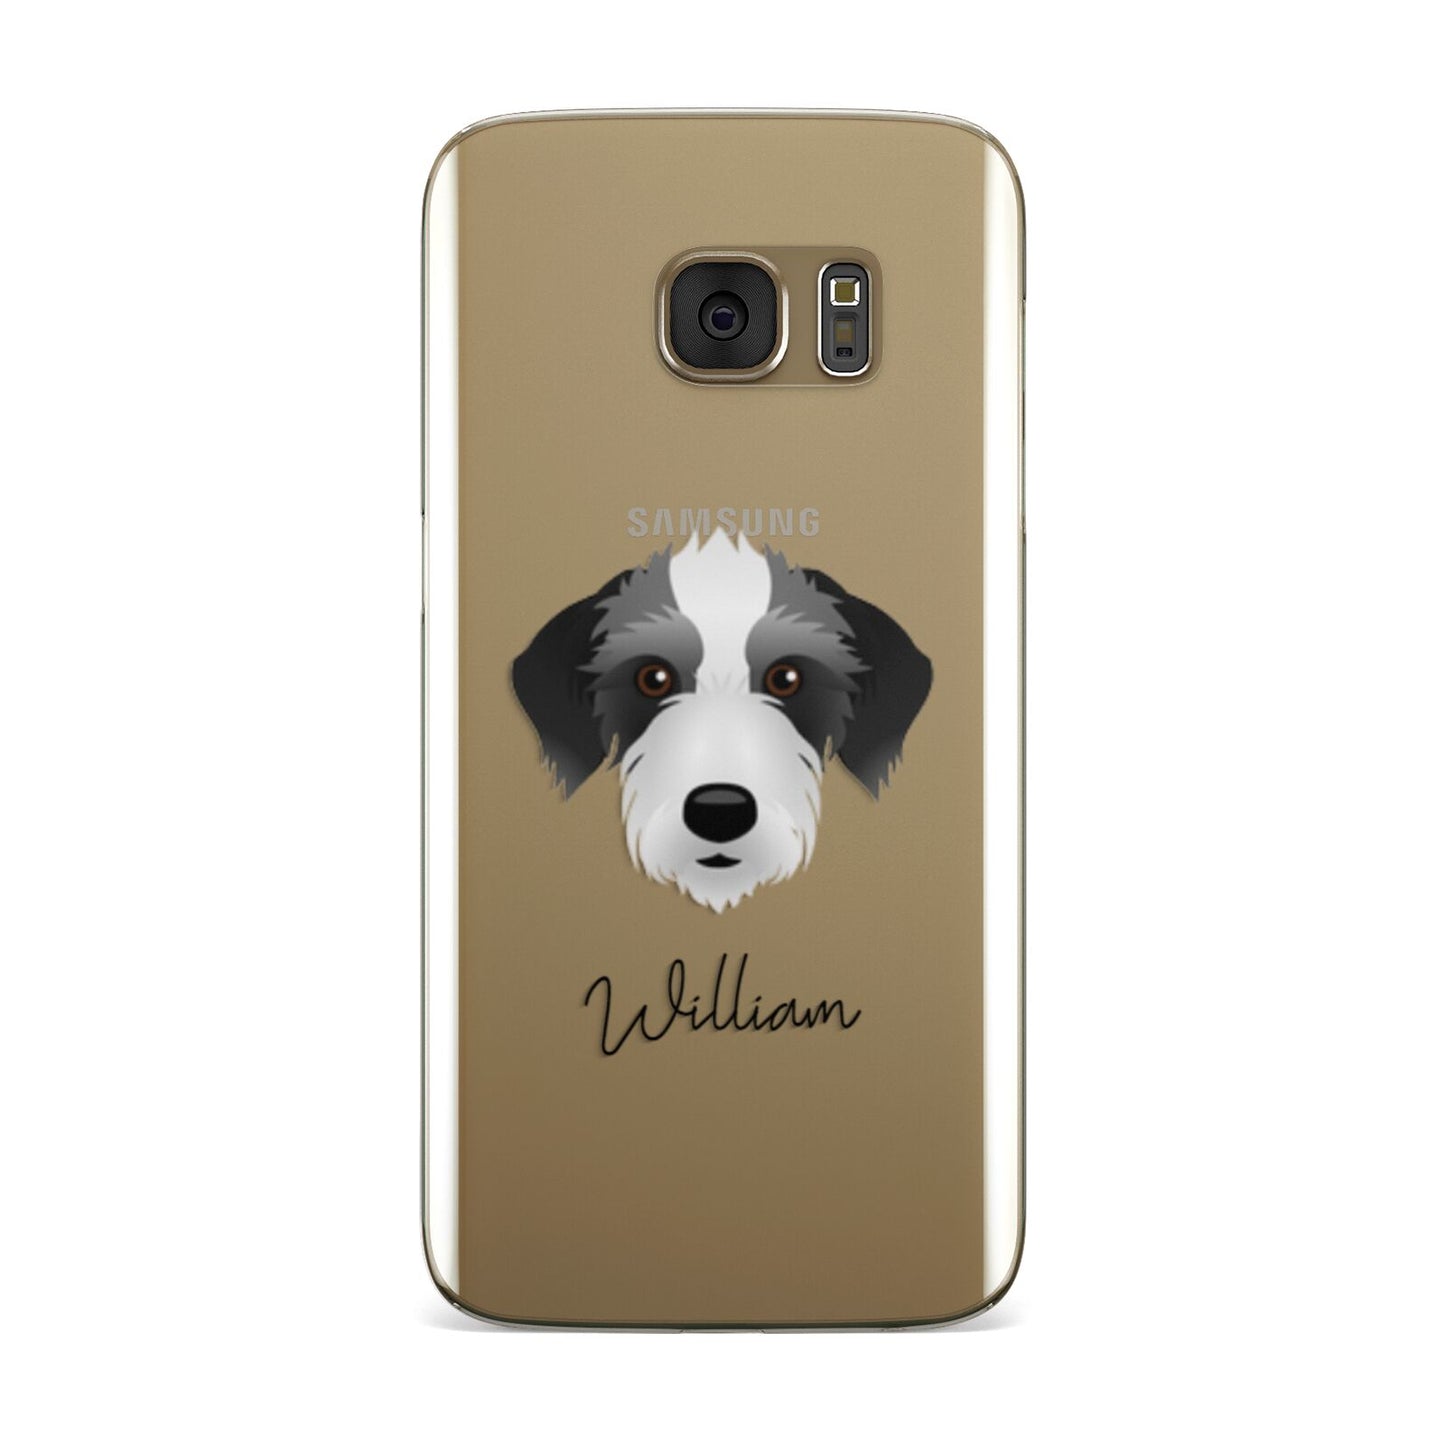 Bedlington Whippet Personalised Samsung Galaxy Case